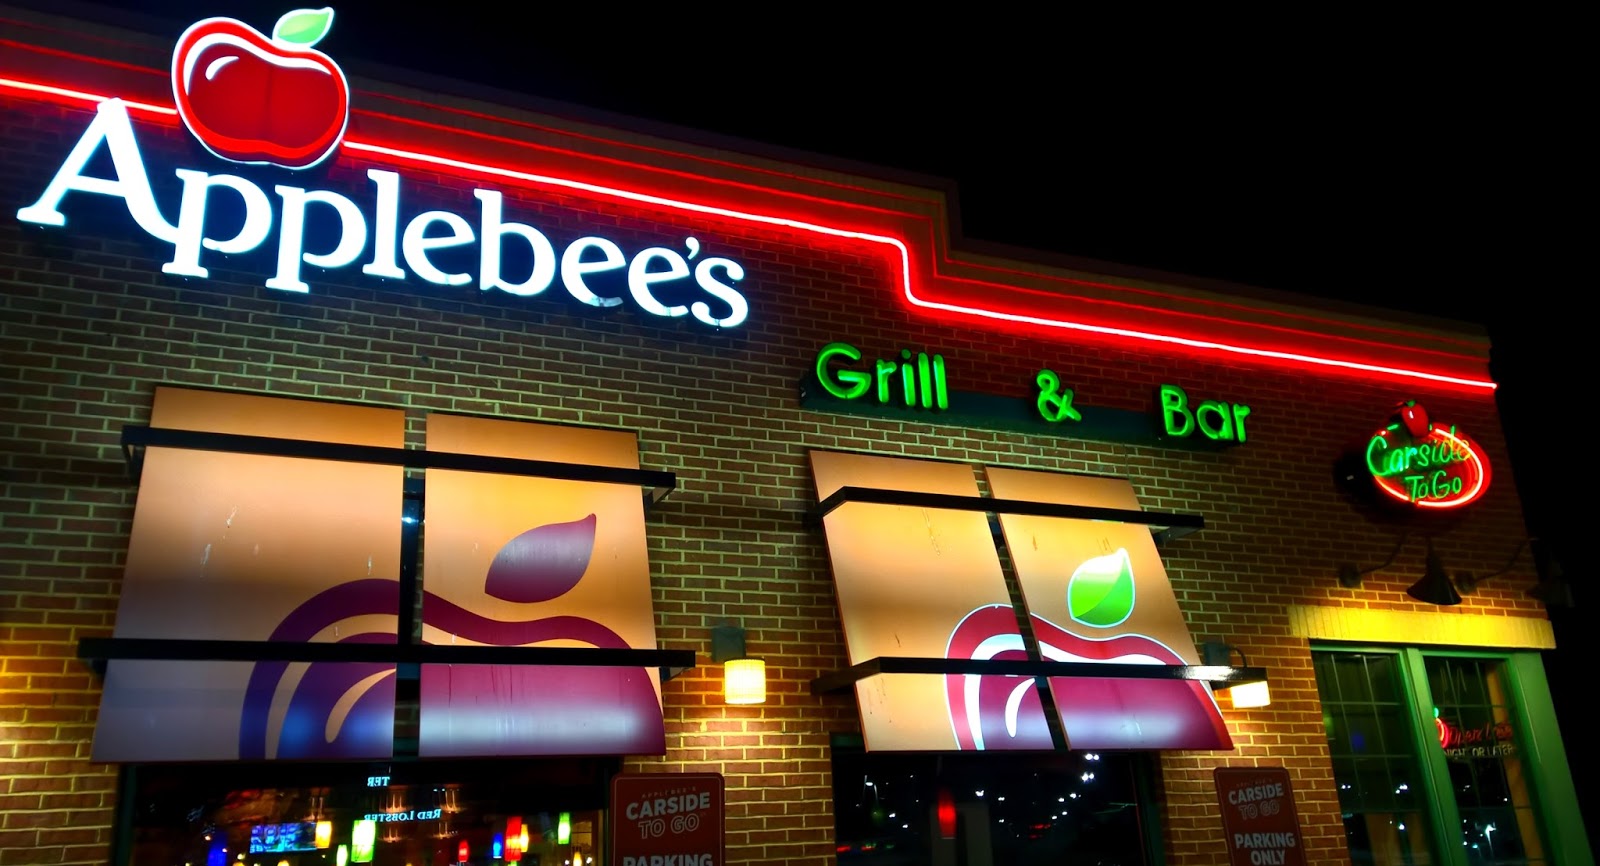 Pittsburgh Owl Scribe: Applebee's - Pulling Me in by Way of a TV Ad